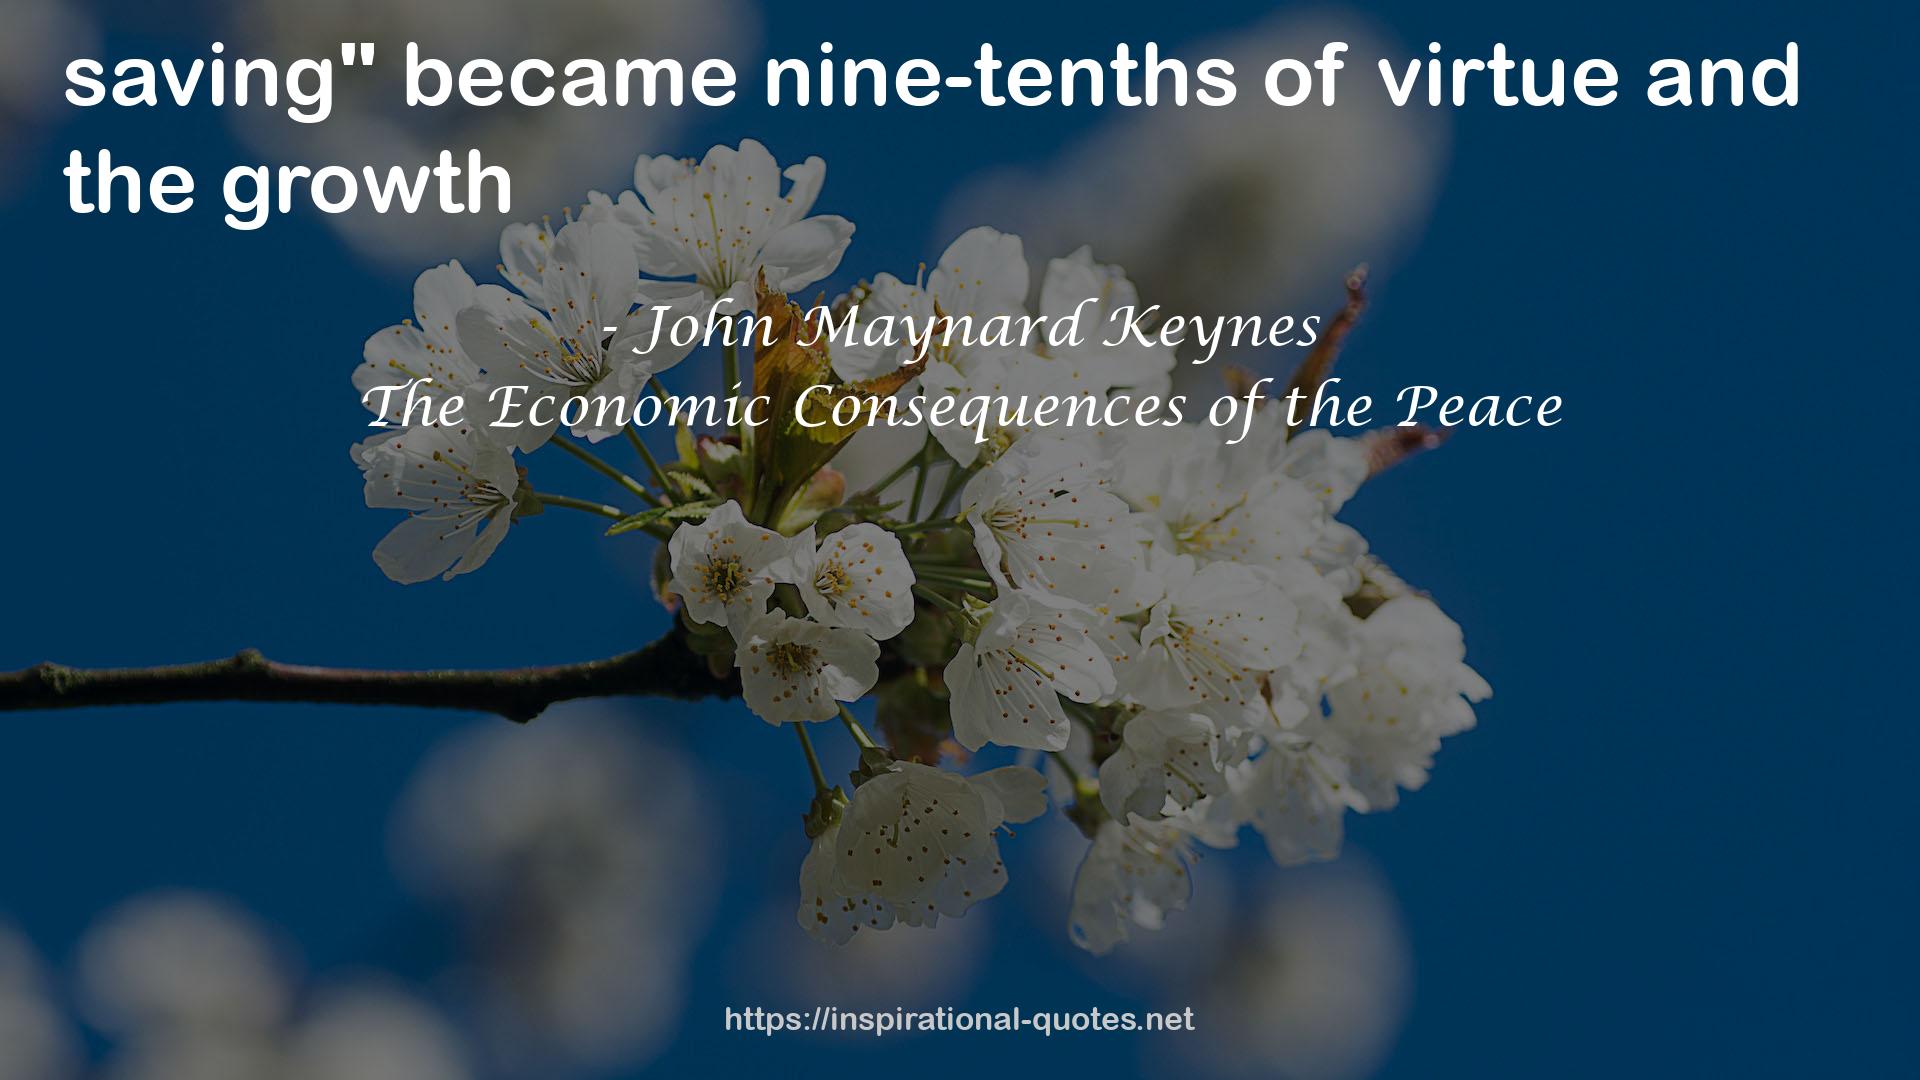 The Economic Consequences of the Peace QUOTES